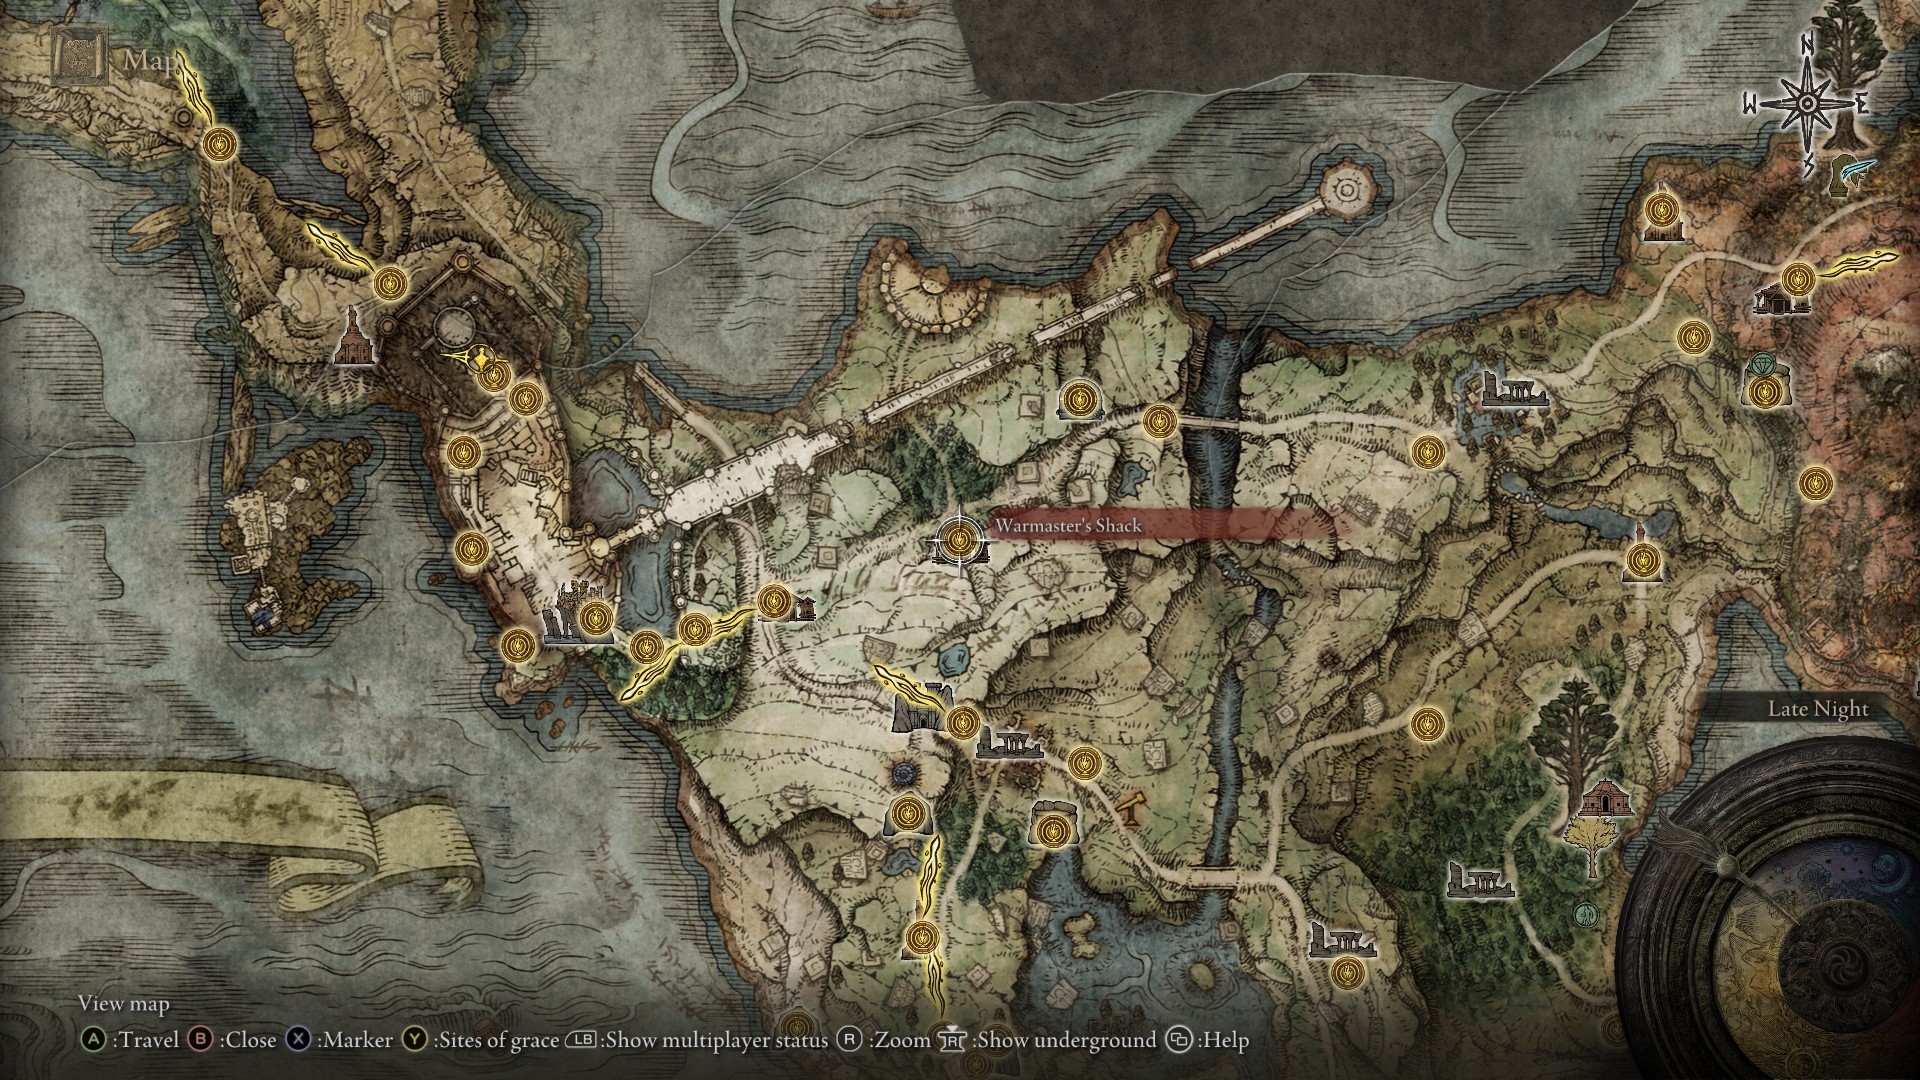 Elden Ring Legendary Talismans Guide: Where to Find All the